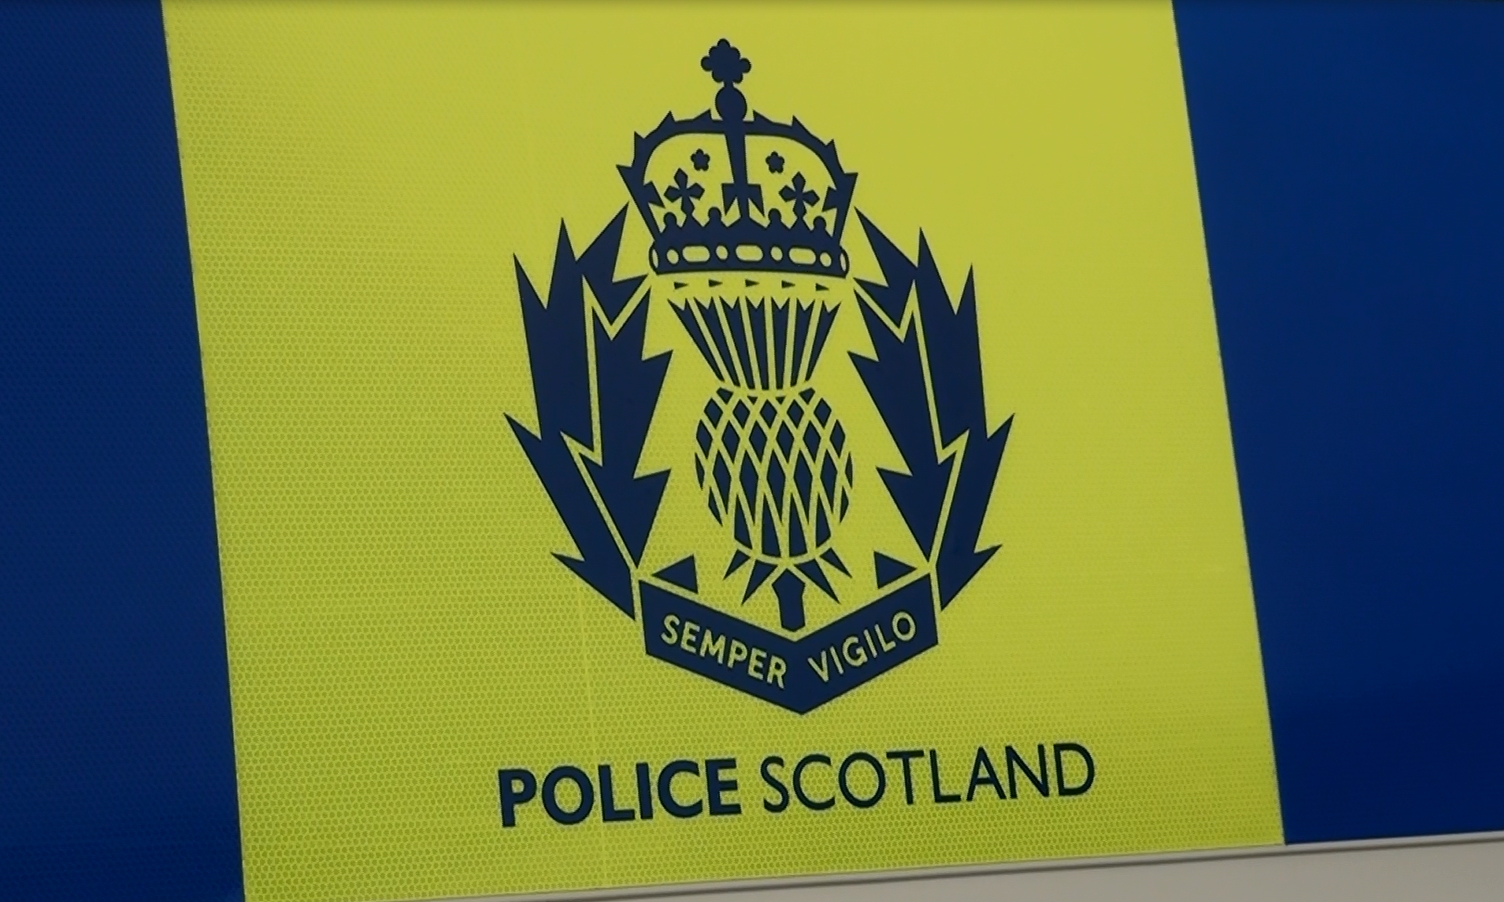 Figures released by Police Scotland show a worrying spike in domestic abuse reports